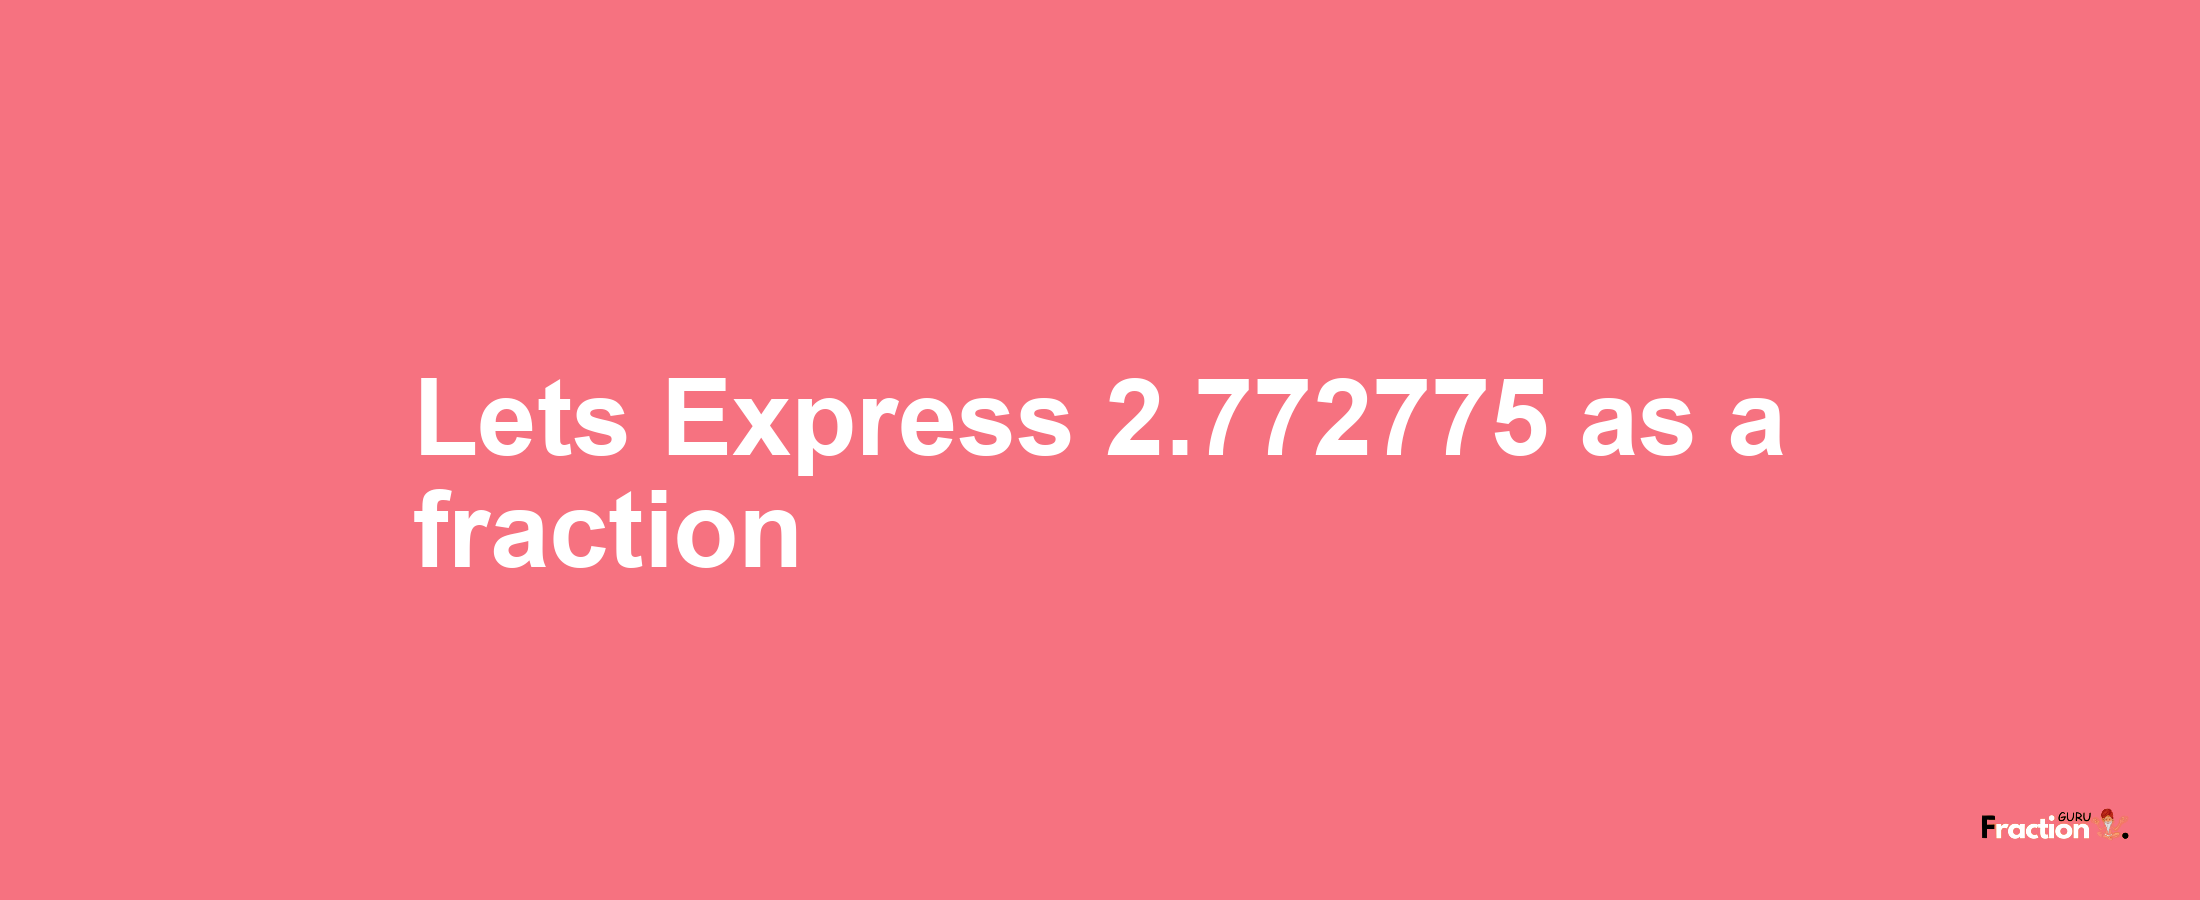 Lets Express 2.772775 as afraction